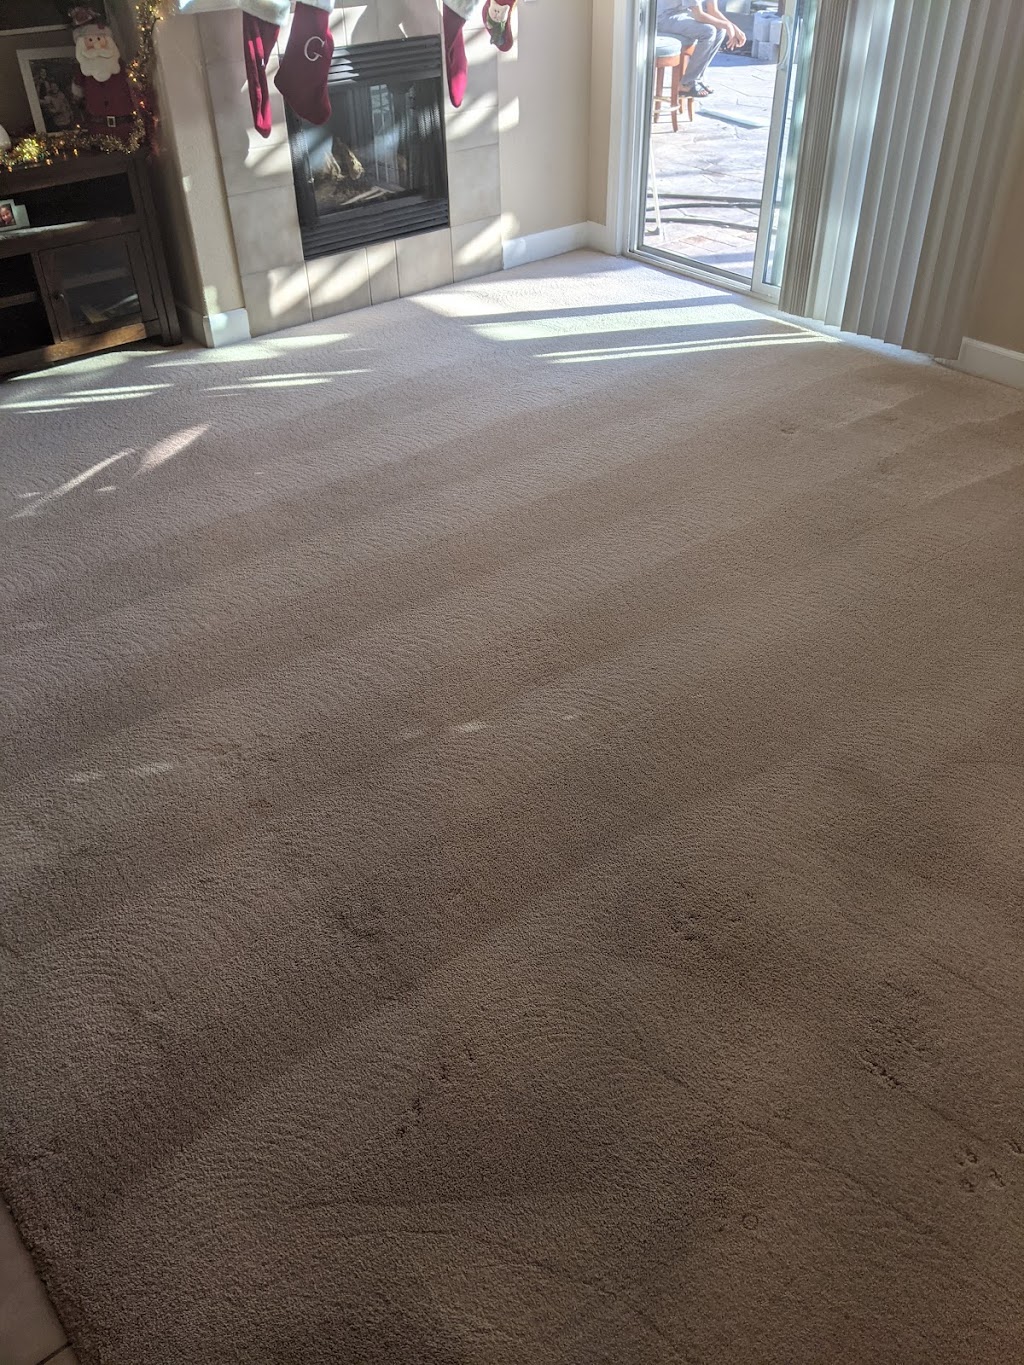 Above All Carpet Cleaning | 3748 Frakes Way, Yuba City, CA 95993 | Phone: (530) 671-1616